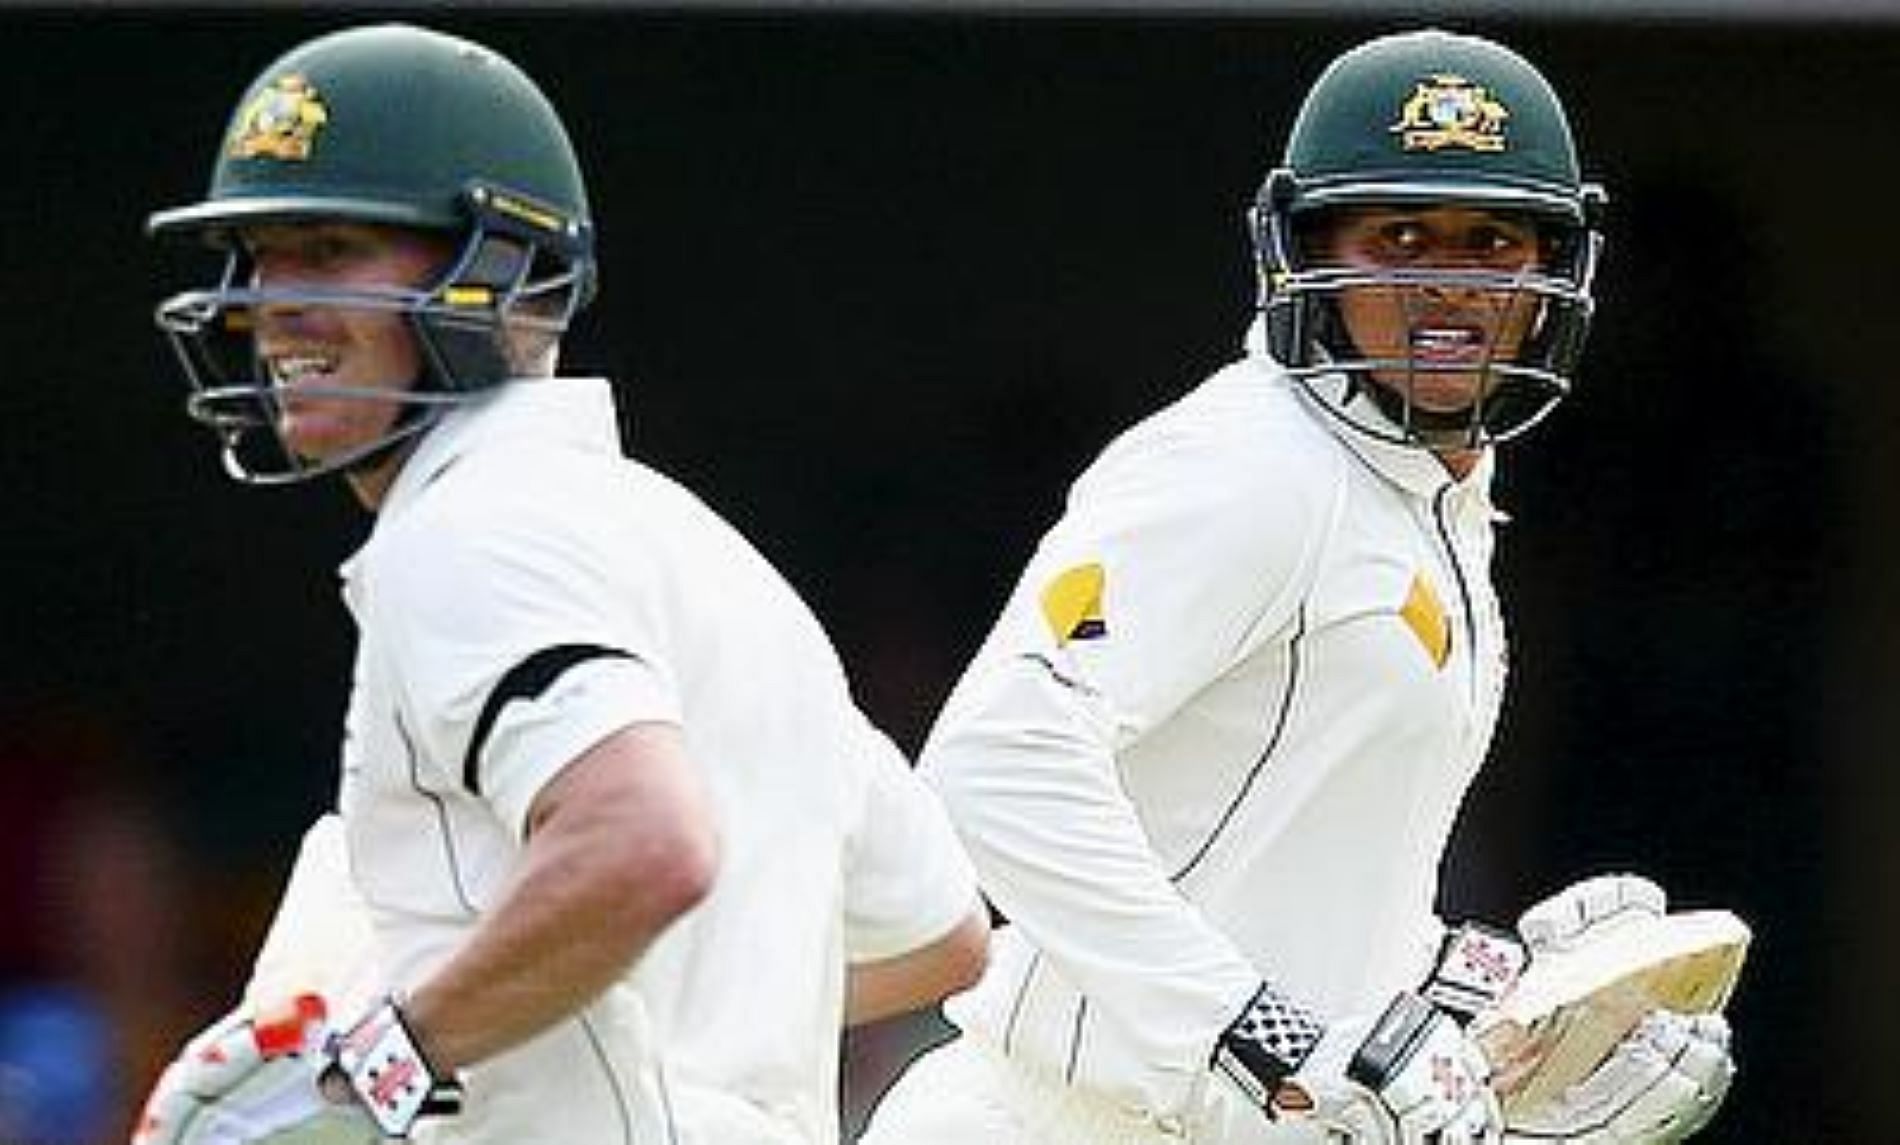 David Warner and Usman Khawaja will look to get Australia off to a solid start in the WTC final.